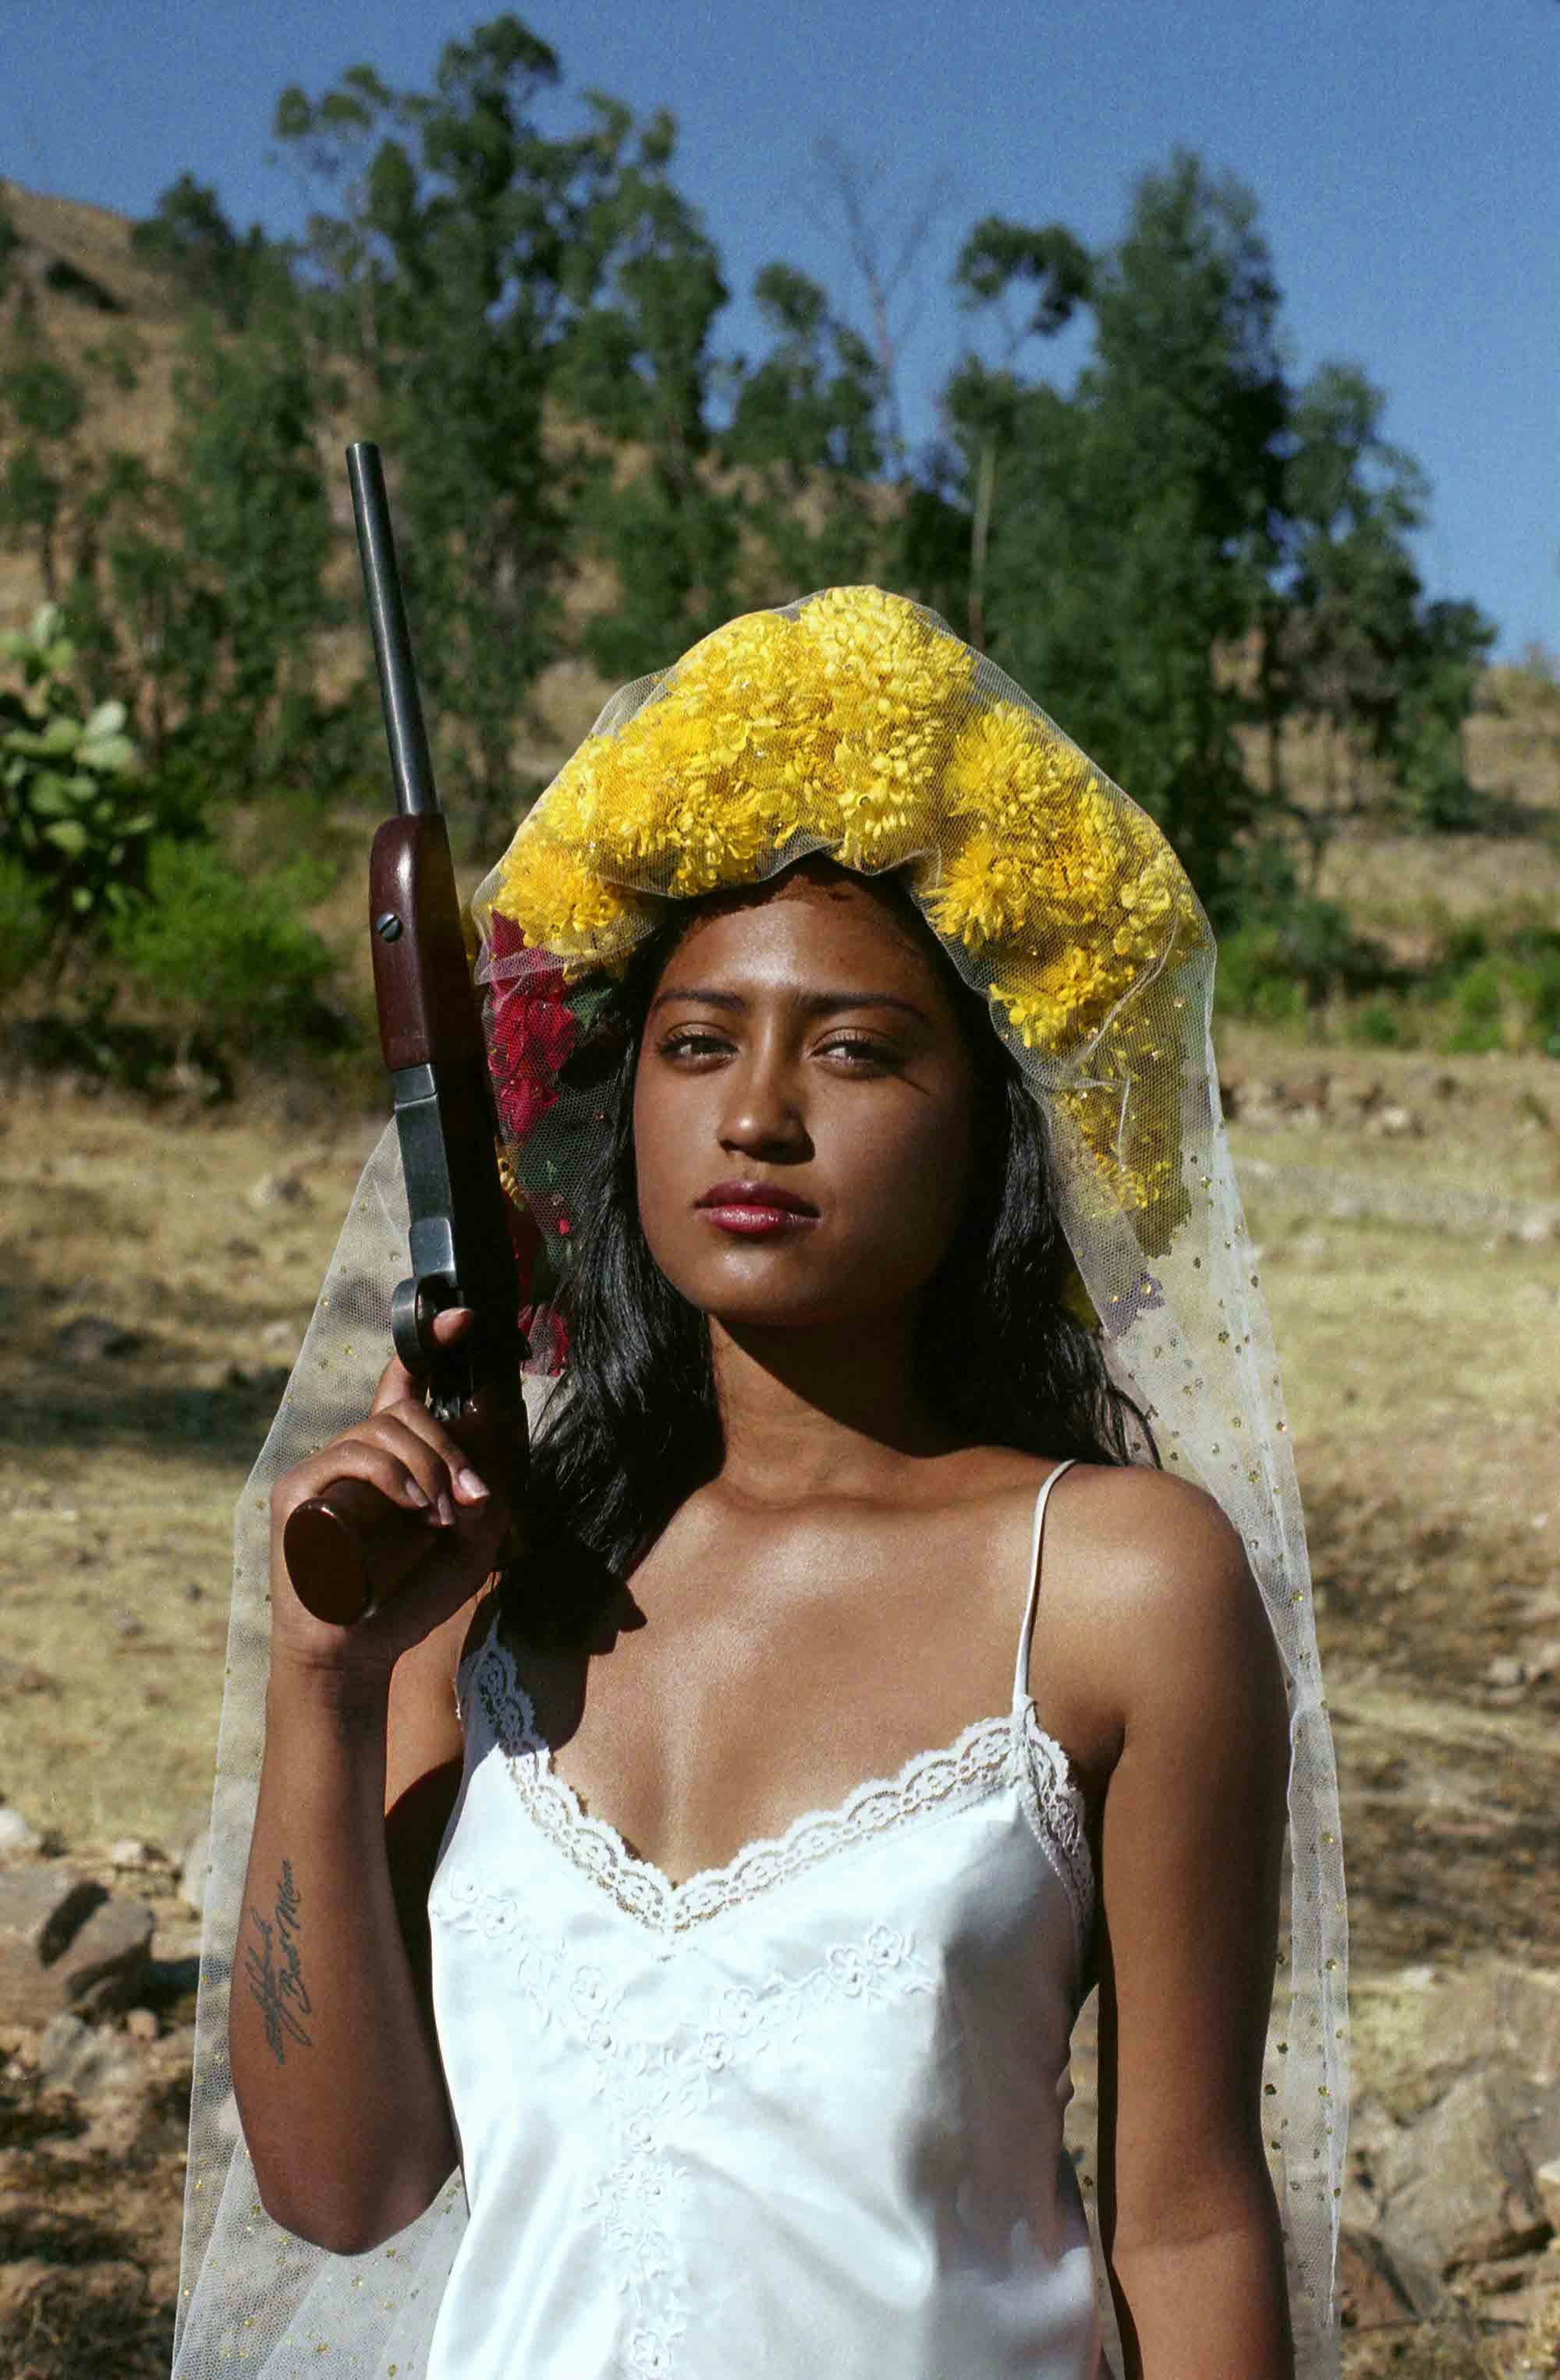 Portrait of a young woman outdoors, wearing a white neglige dress and a bright yellow flower crown, holding a rifle up in the air© Marisol Mendez